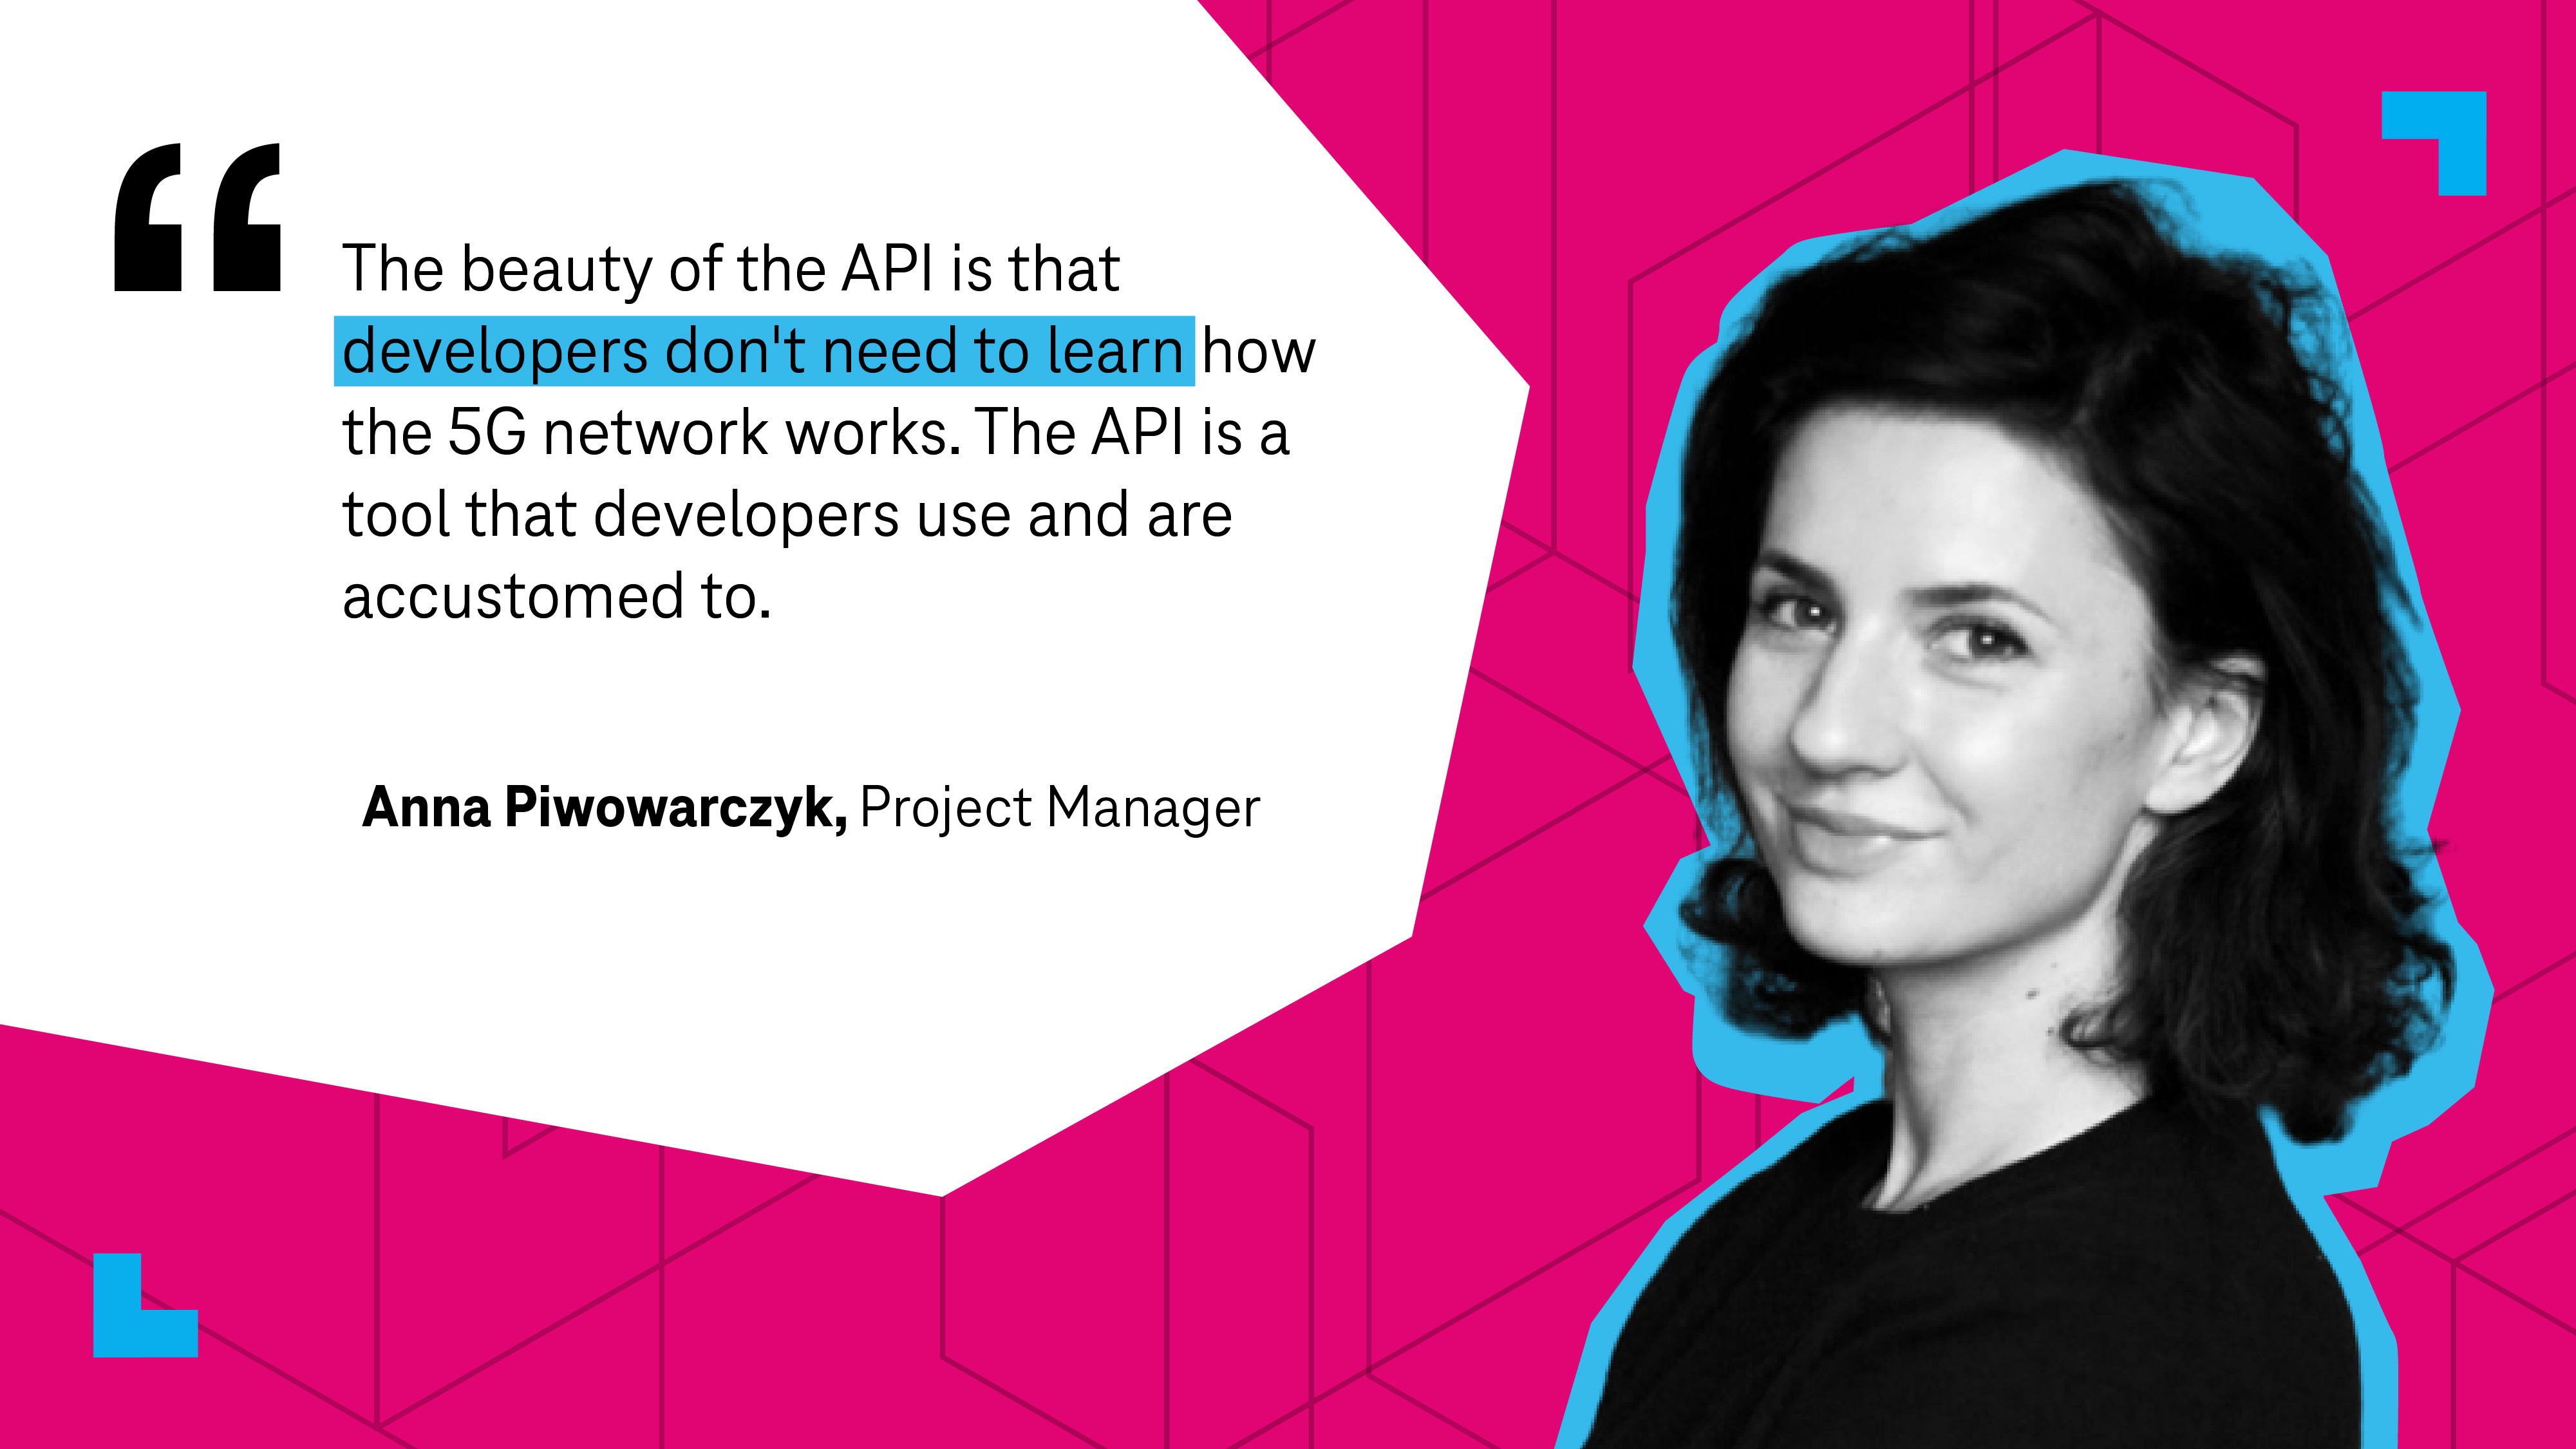 “The beauty of the API is that developers don't need to learn how the 5G network works,” comments Project Manager Anna Piwowarczyk. “They don't need to know the individual components, their roles, protocols and call flows. The API is a tool that developers use and are accustomed to.”